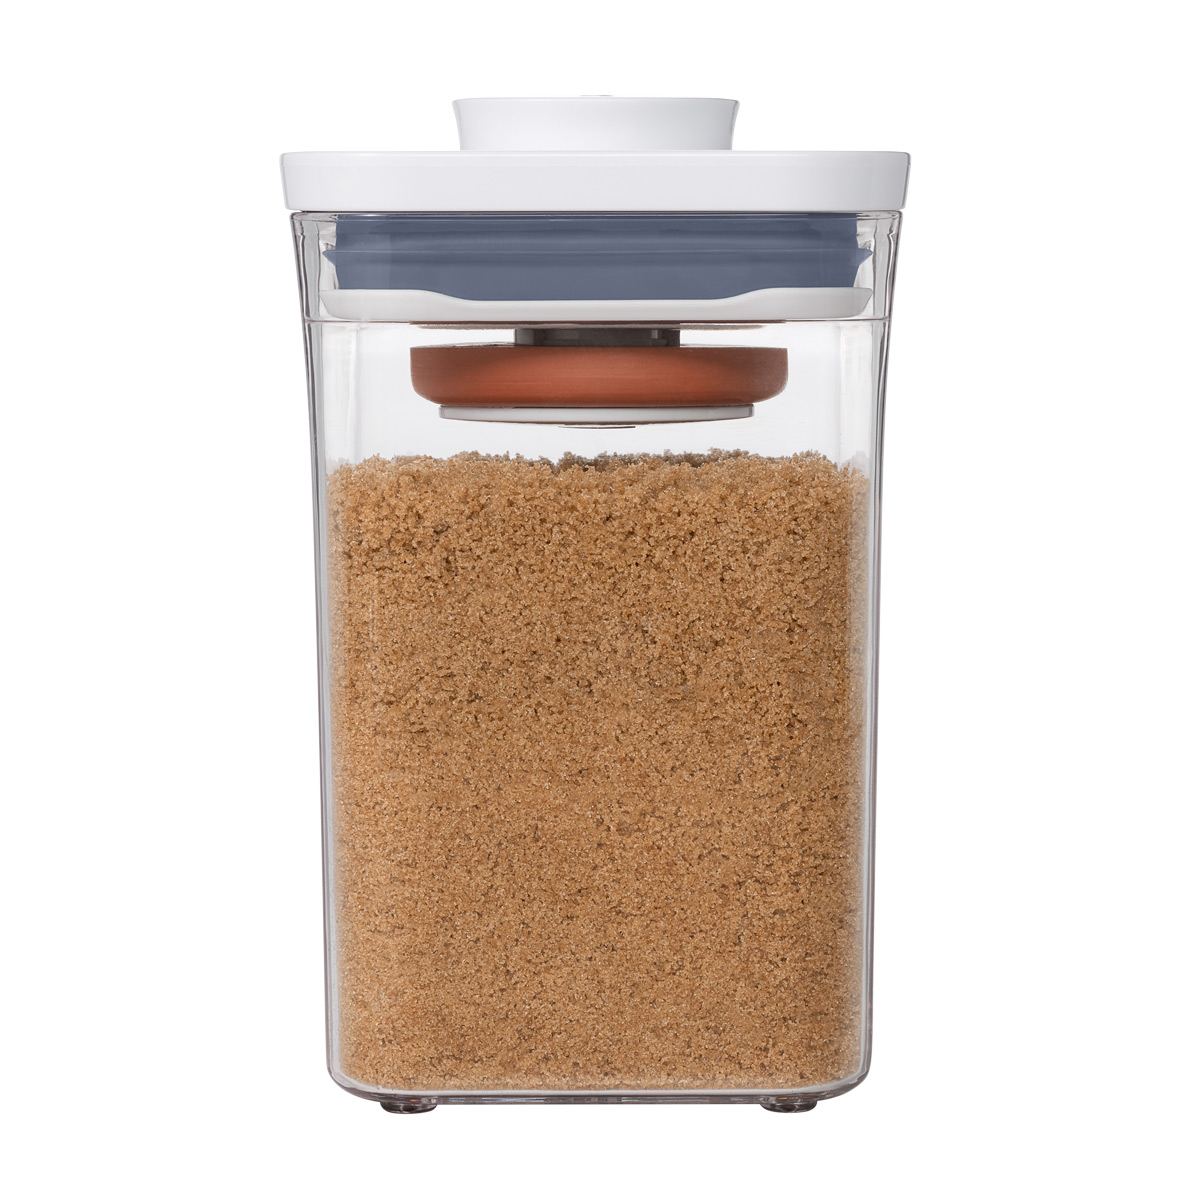 https://www.containerstore.com/catalogimages/368974/10075024-OXO-POP-Brown-Sugar-Keeper-.jpg